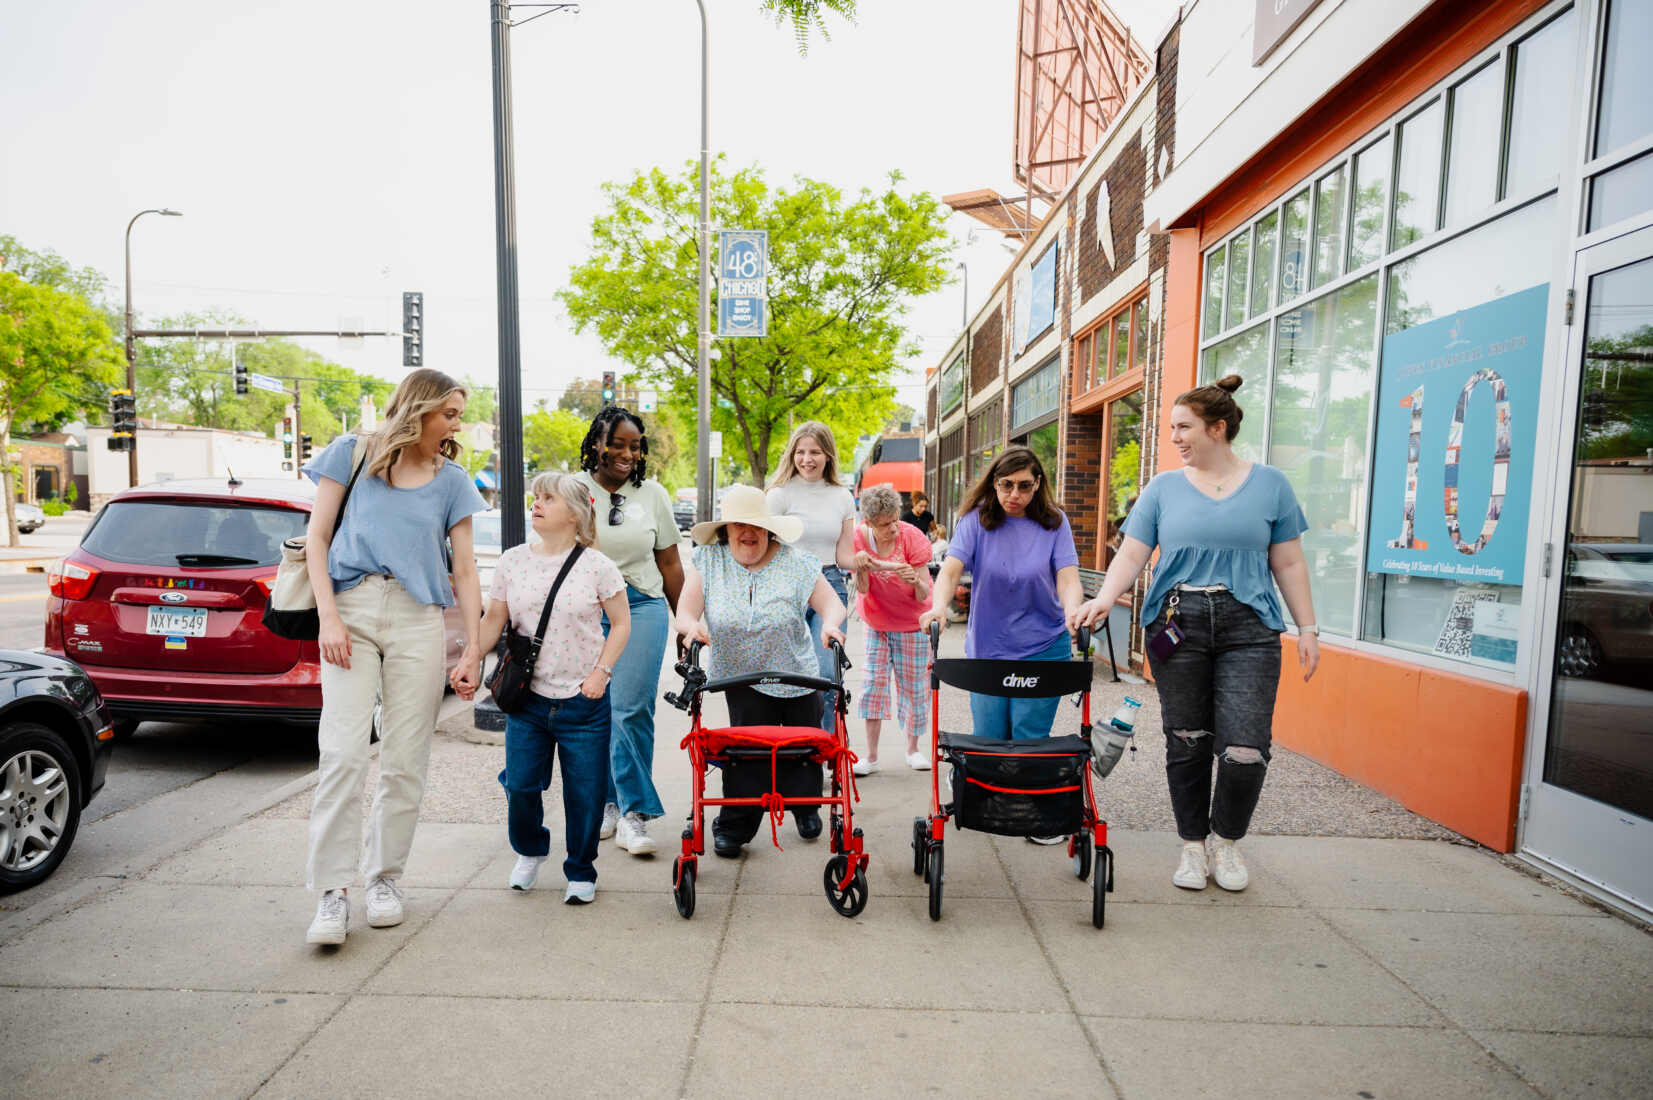 Direct Care Professional and Direct Care Assistant employees at ACR Homes take people with disabilities who are residents on a group outing for ice cream